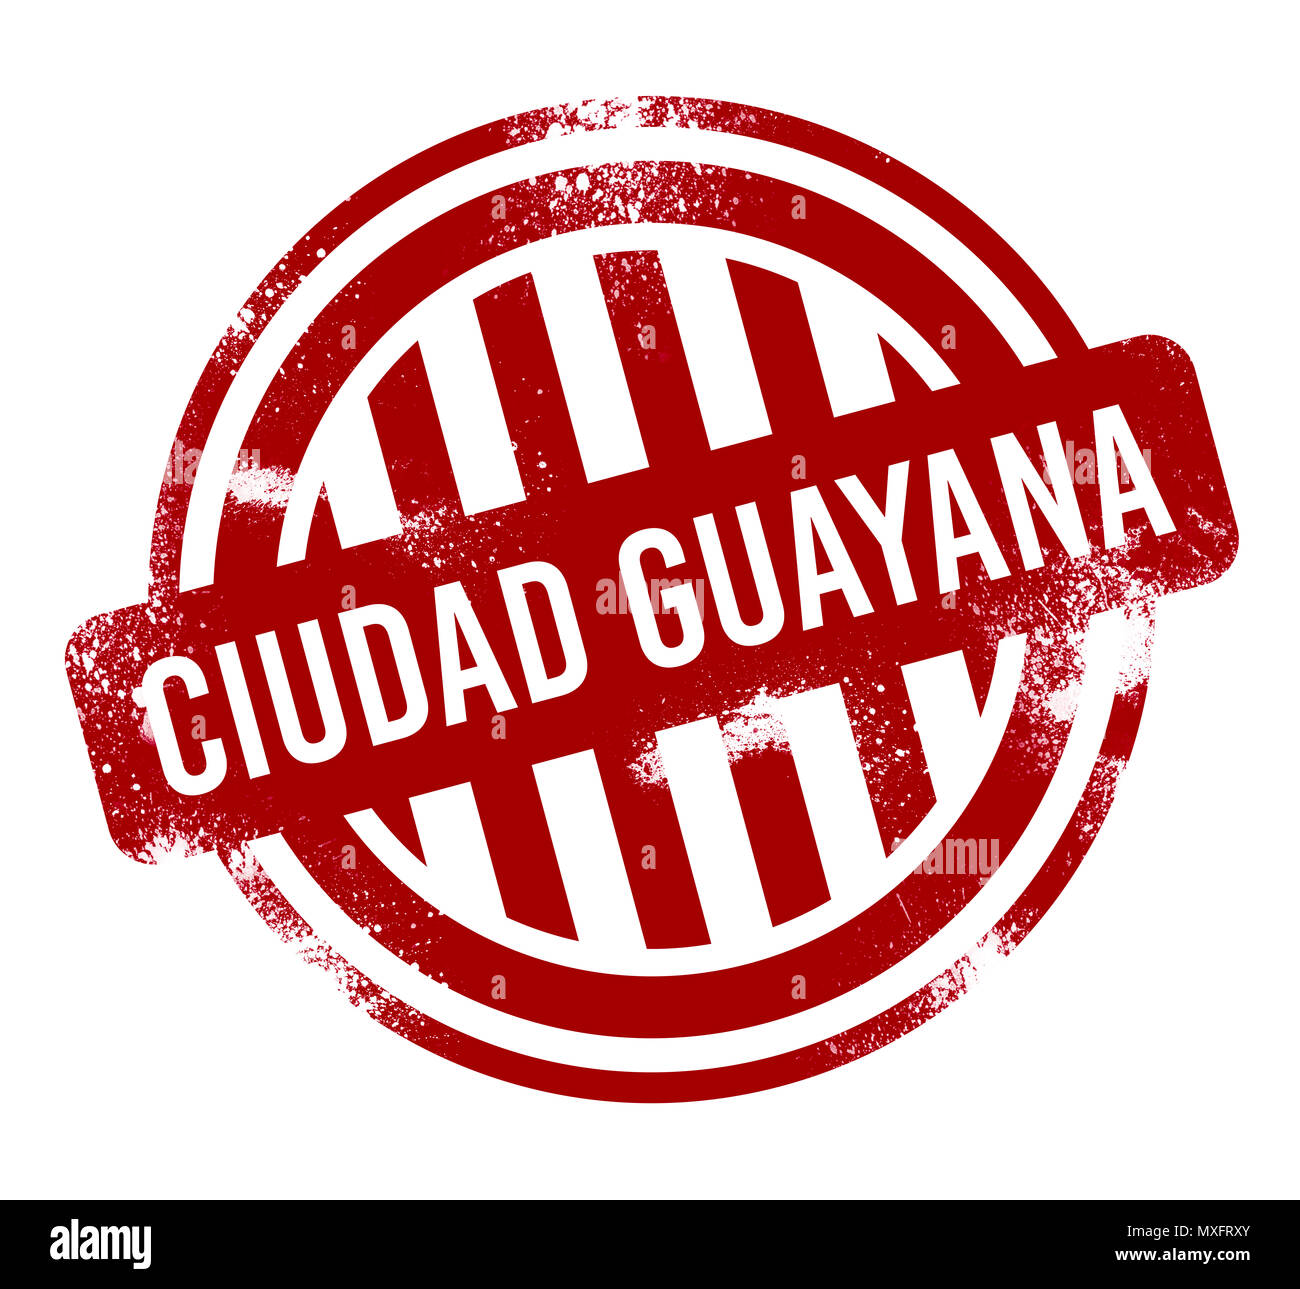 Ciudad Guayana - Red grunge button, stamp Stock Photo